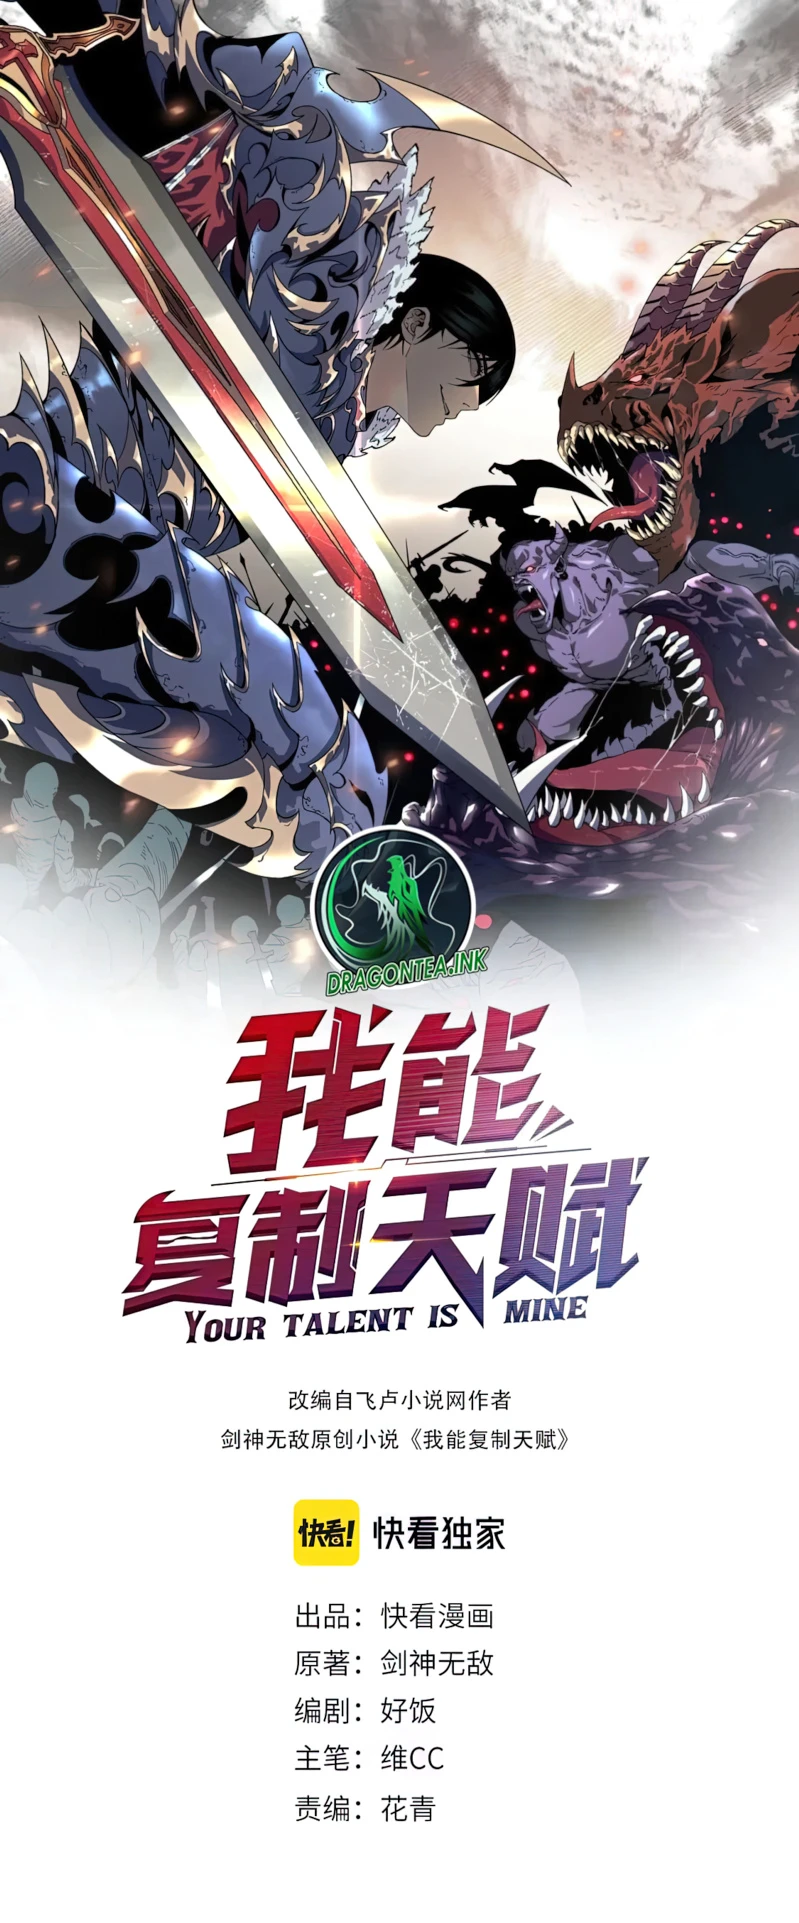 Your Talent Is Mine Chapter 65 scans online, Read Your Talent Is Mine Chapter 65 in english, read Your Talent Is Mine Chapter 65 for free, Your Talent Is Mine Chapter 65 void scans, Your Talent Is Mine Chapter 65 void scans, , Your Talent Is Mine Chapter 65 at void scans